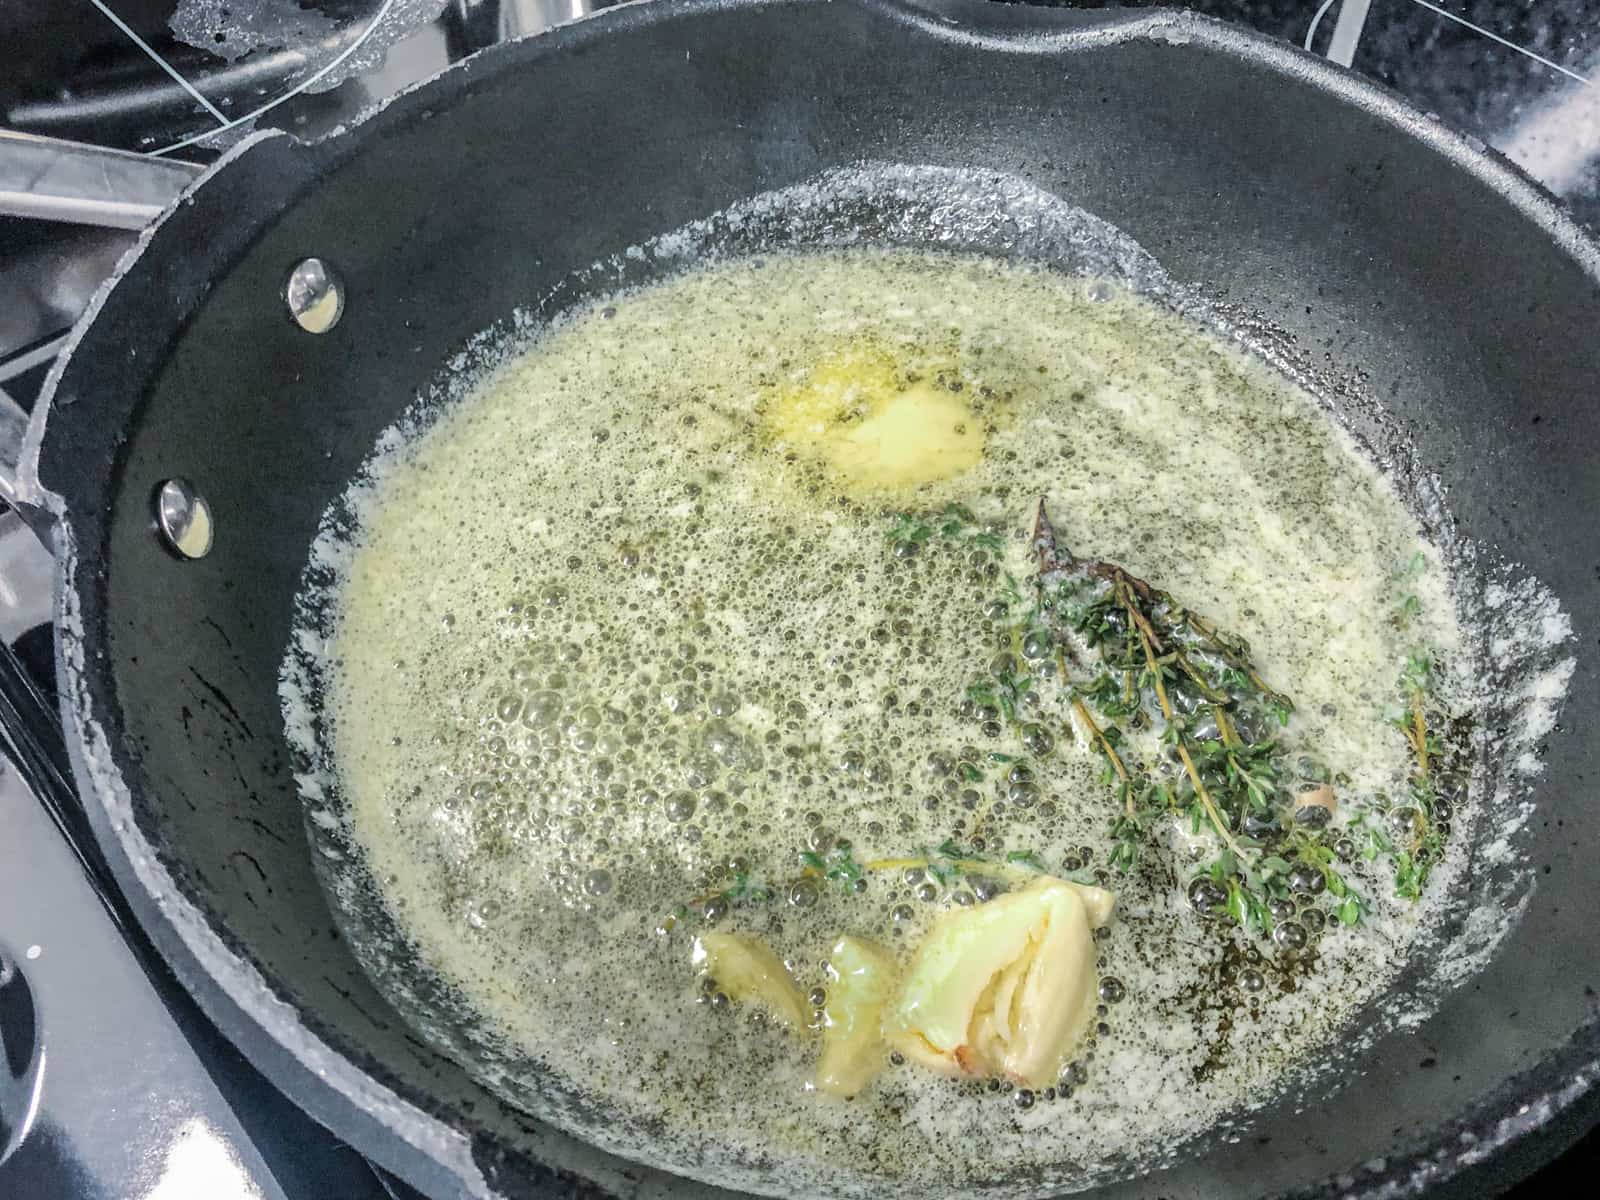 Butter melted and just starting to froth with garlic and fresh thyme leaves in a heavy based frypan.